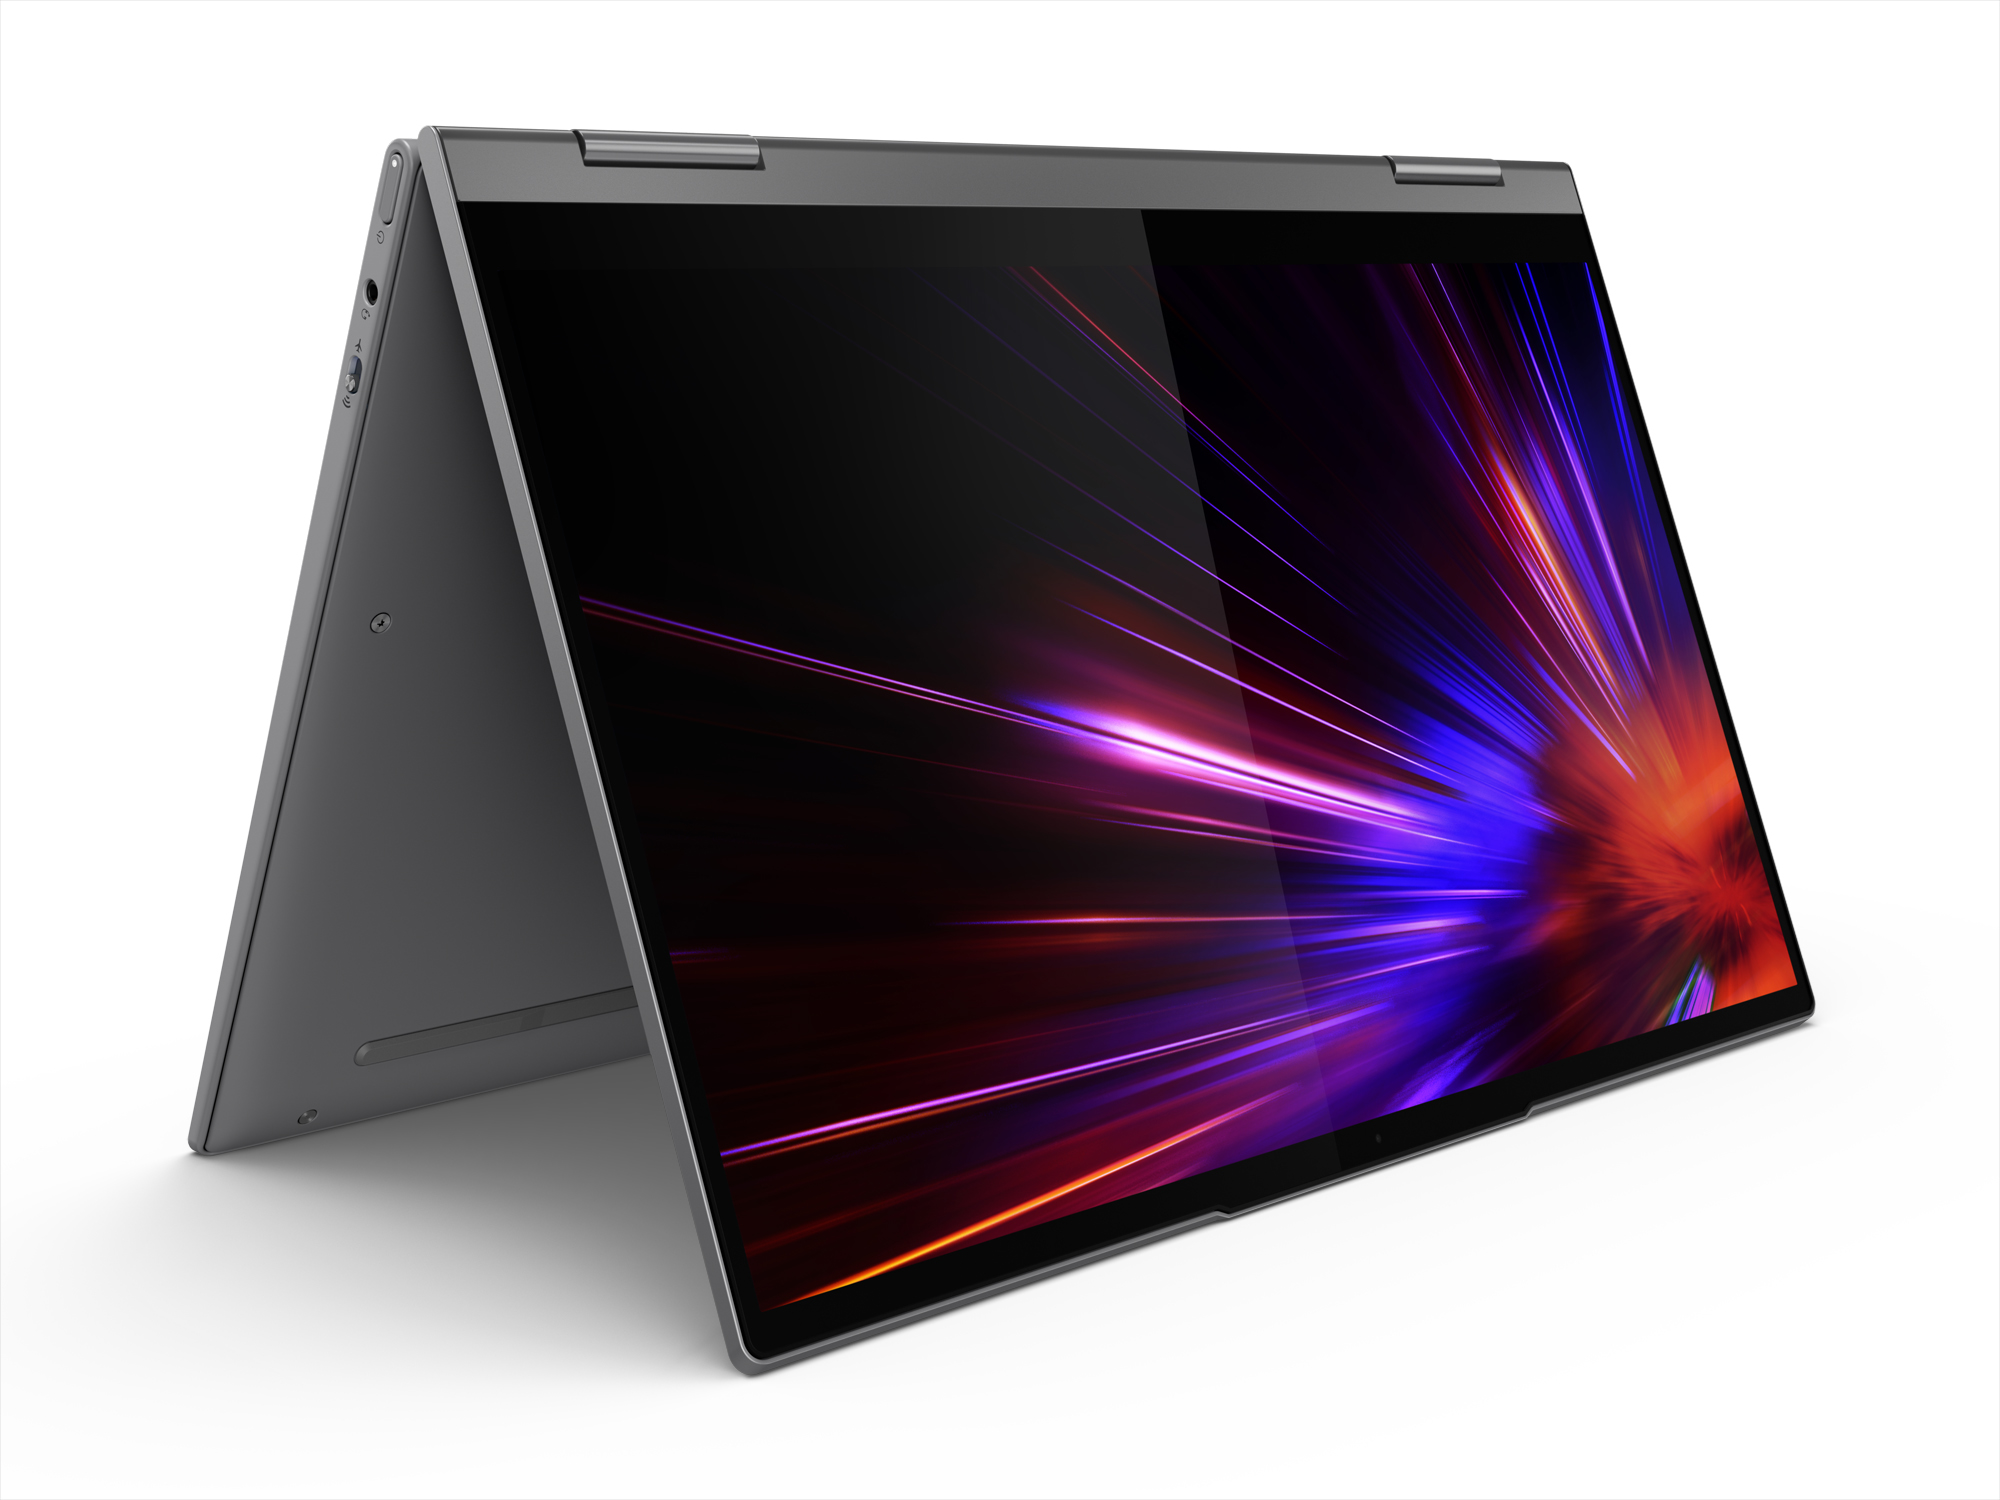 CES 2020: The Lenovo Yoga 5G with Qualcomm's 8cx and Support for  mmWave/Sub-6